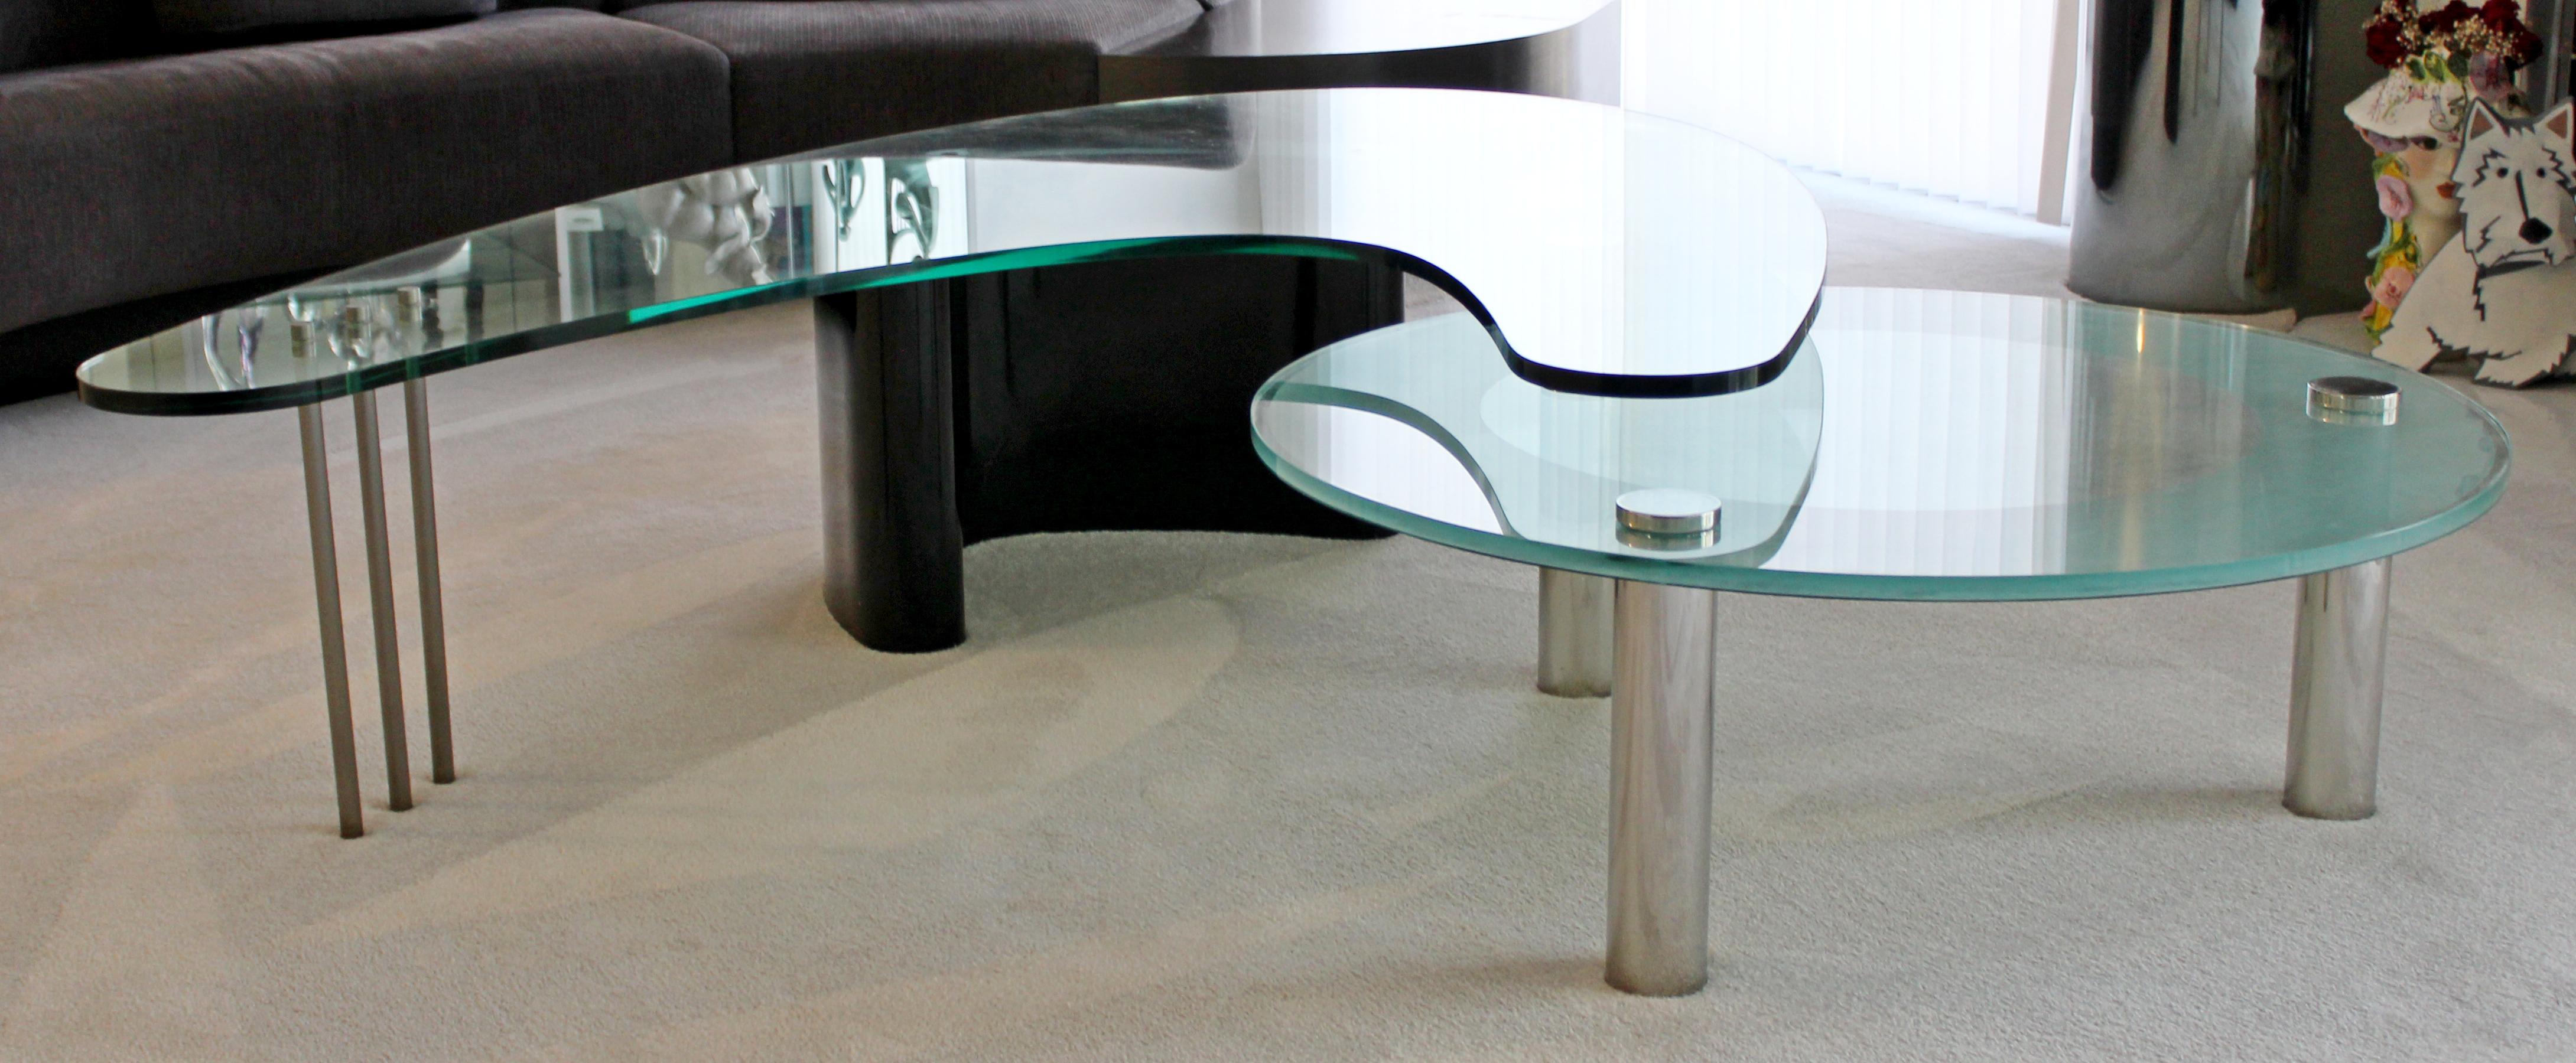 For your consideration is a totally unique, custom made coffee table, with mixed chrome and black bases and with asymmetrical glass tops, circa the 1970s. In excellent condition. The dimensions are 77